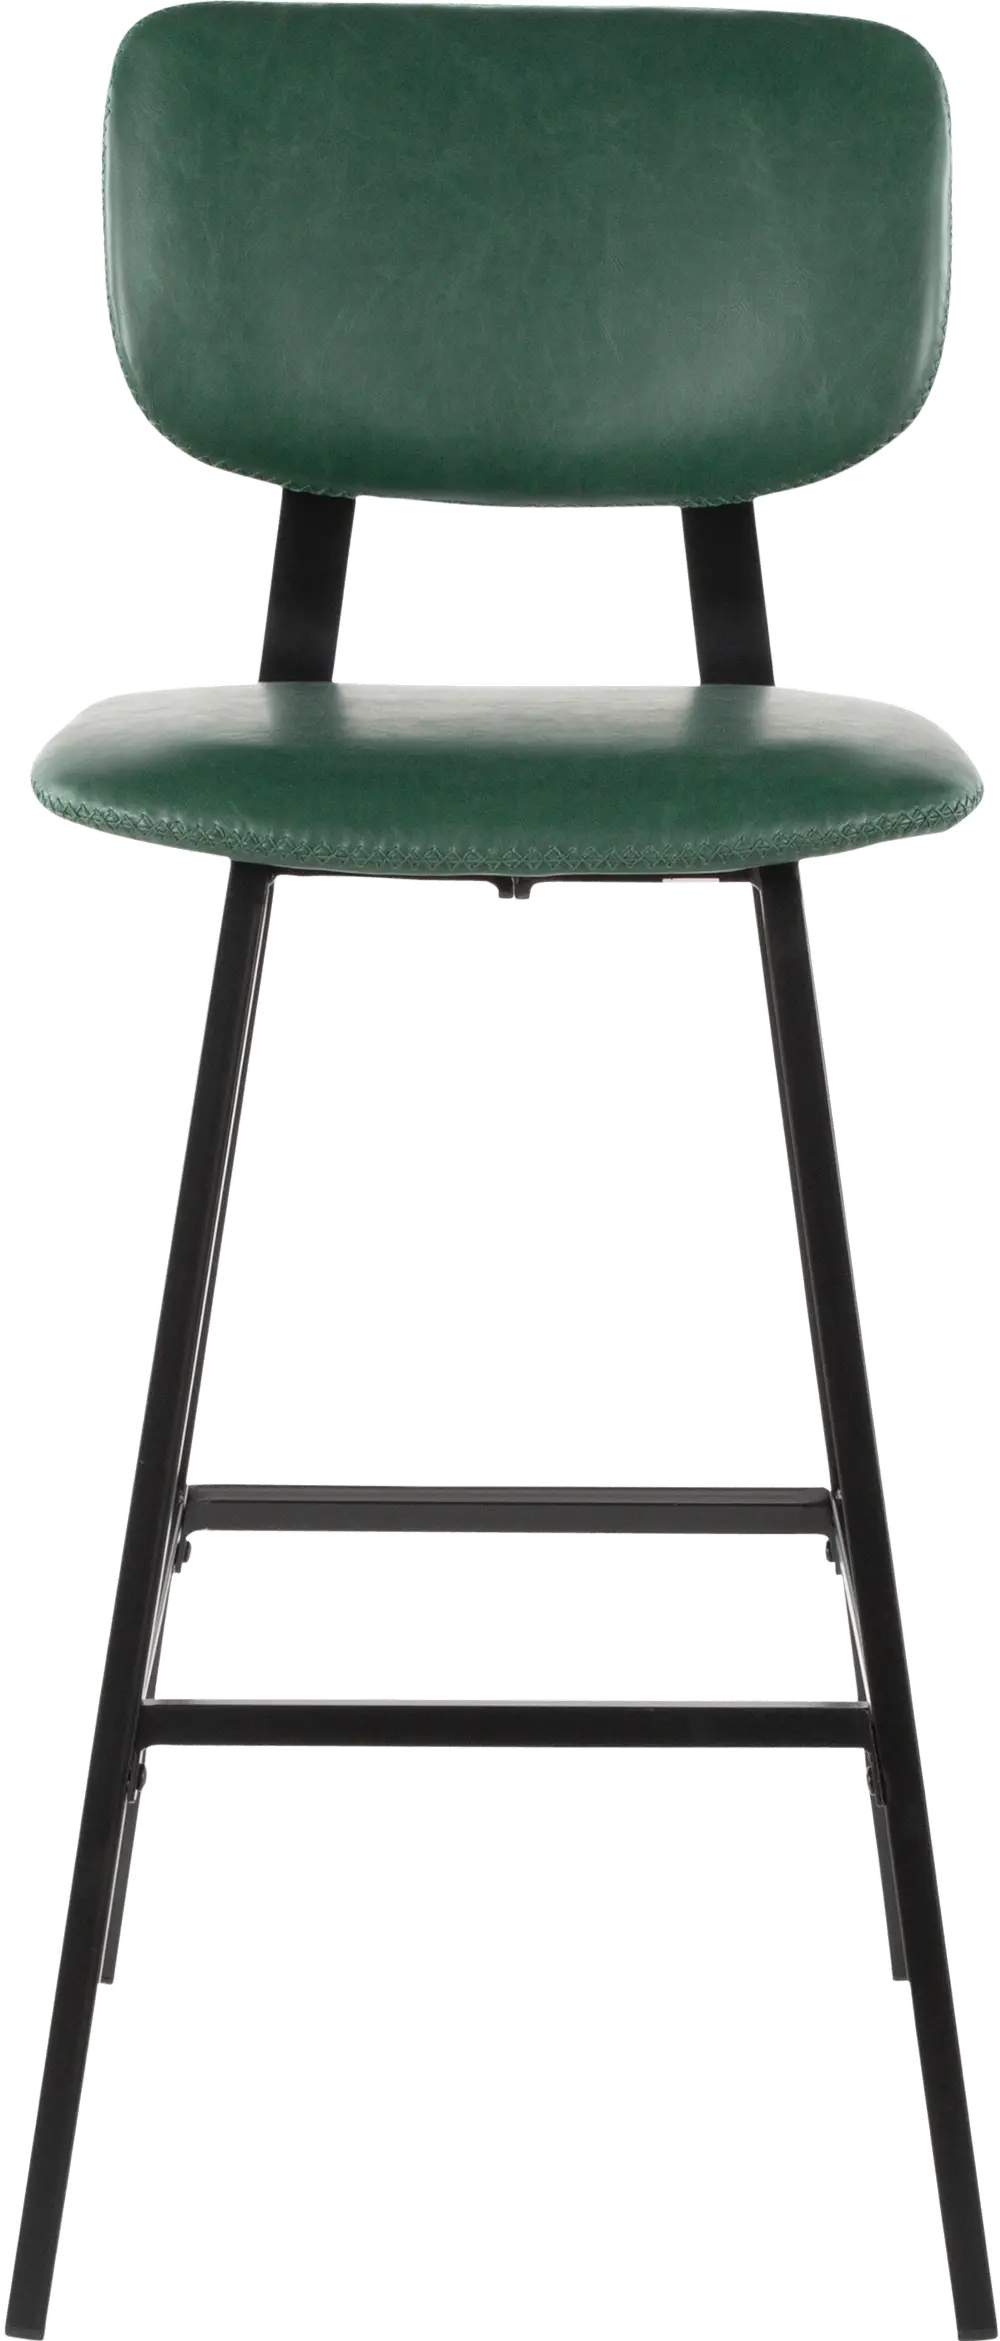 B30-FNDY-BK-GN2 Contemporary Green and Black Faux Leather Bar Stool (Set of 2) - Foundry-1